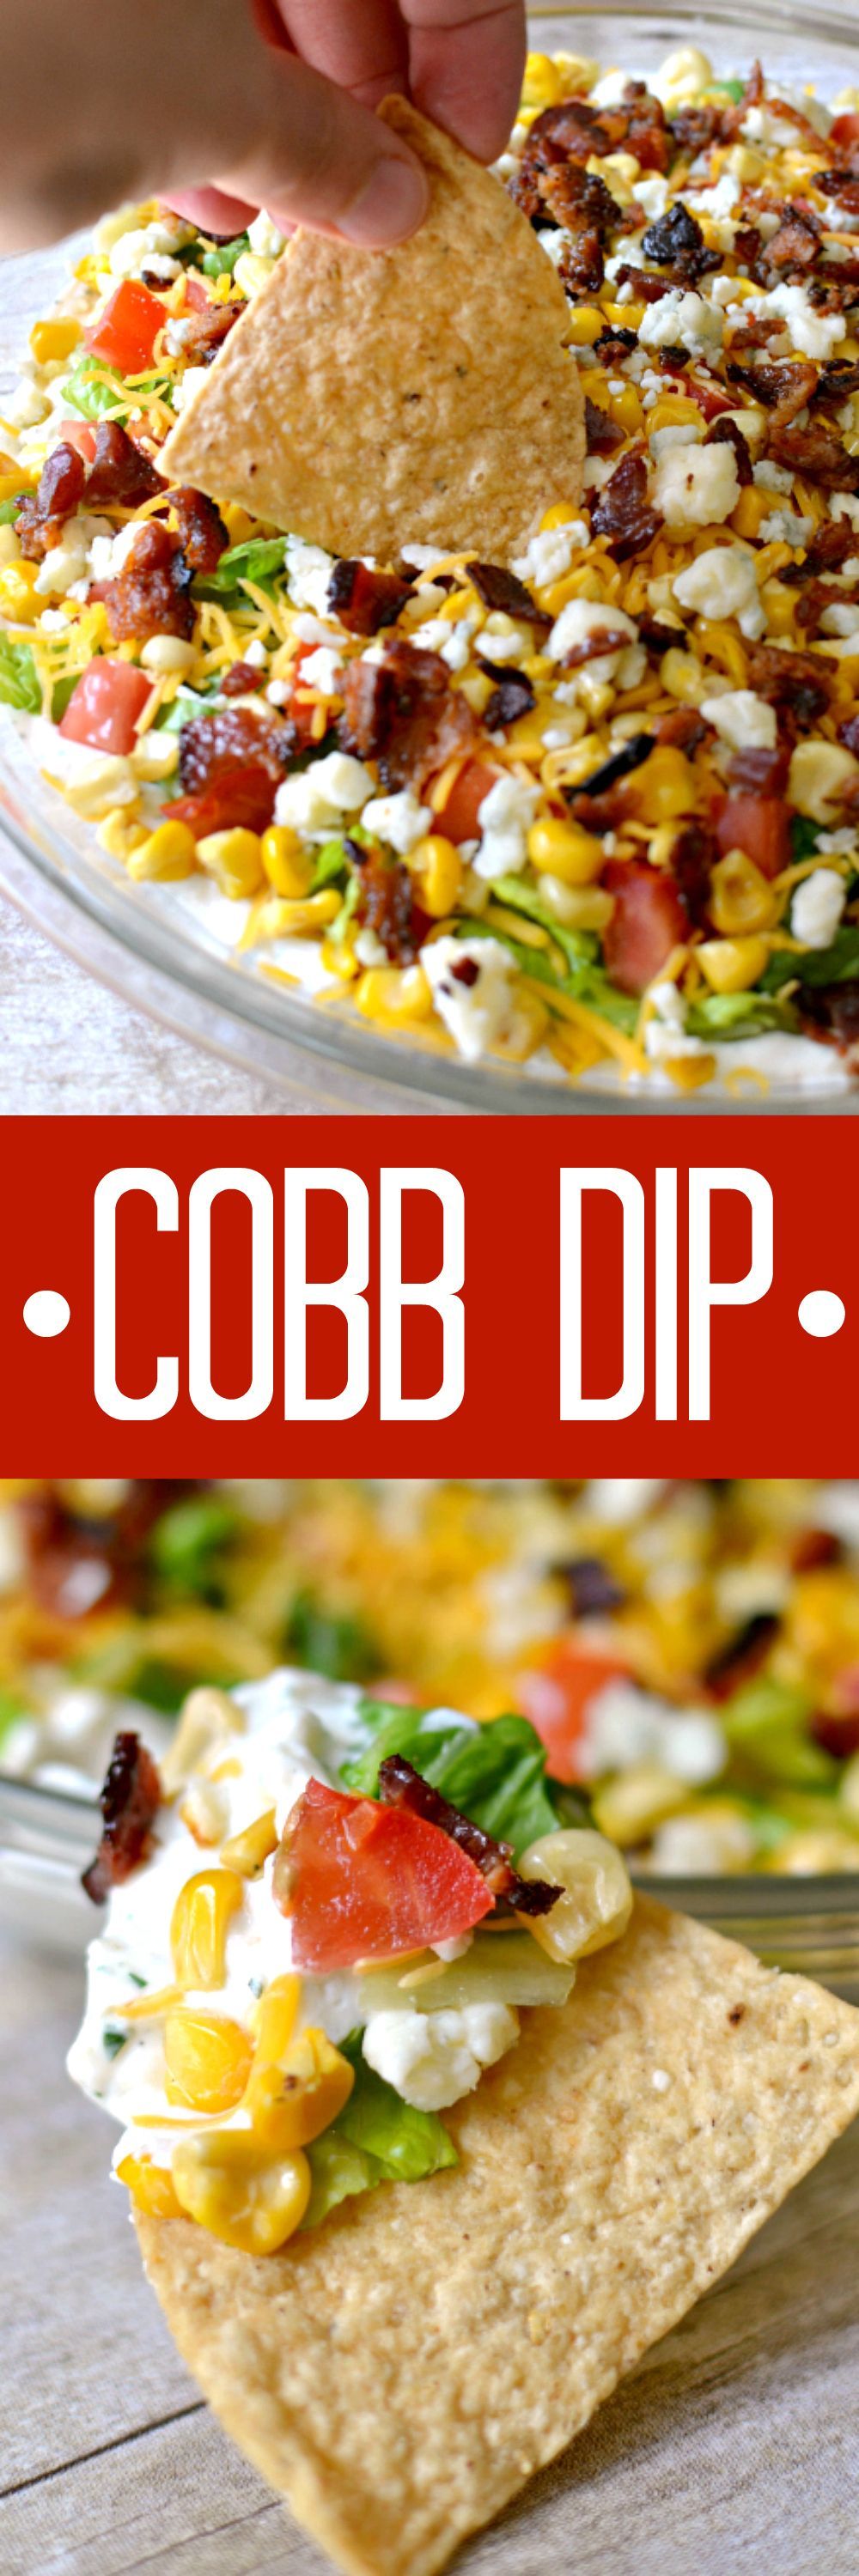 Cobb Dip – a delicious dip made with creamy ranch, lettuce, tomatoes, grilled corn, shredded cheese, bacon, and blue cheese